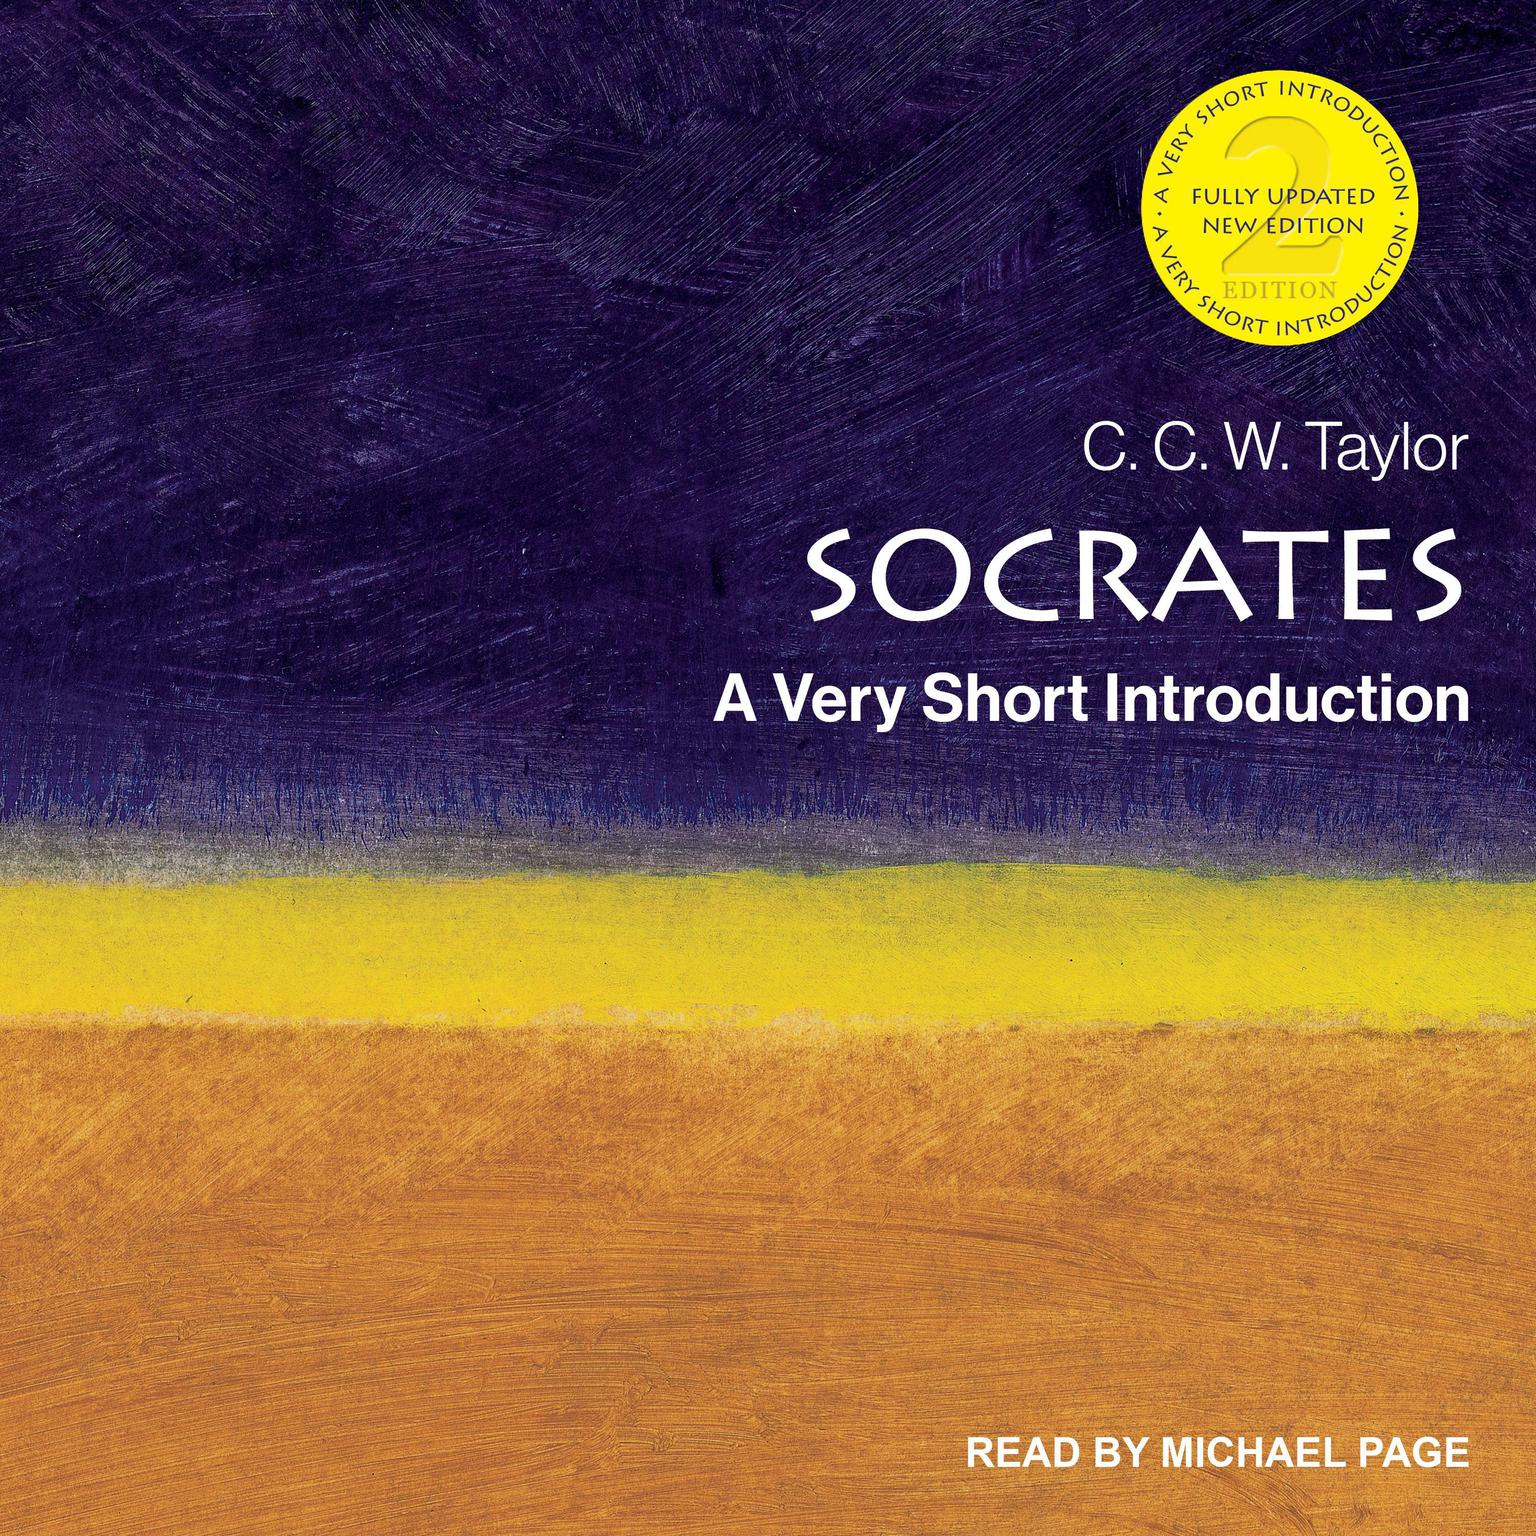 Socrates: A Very Short Introduction, 2nd Edition Audiobook, by C.C.W. Taylor